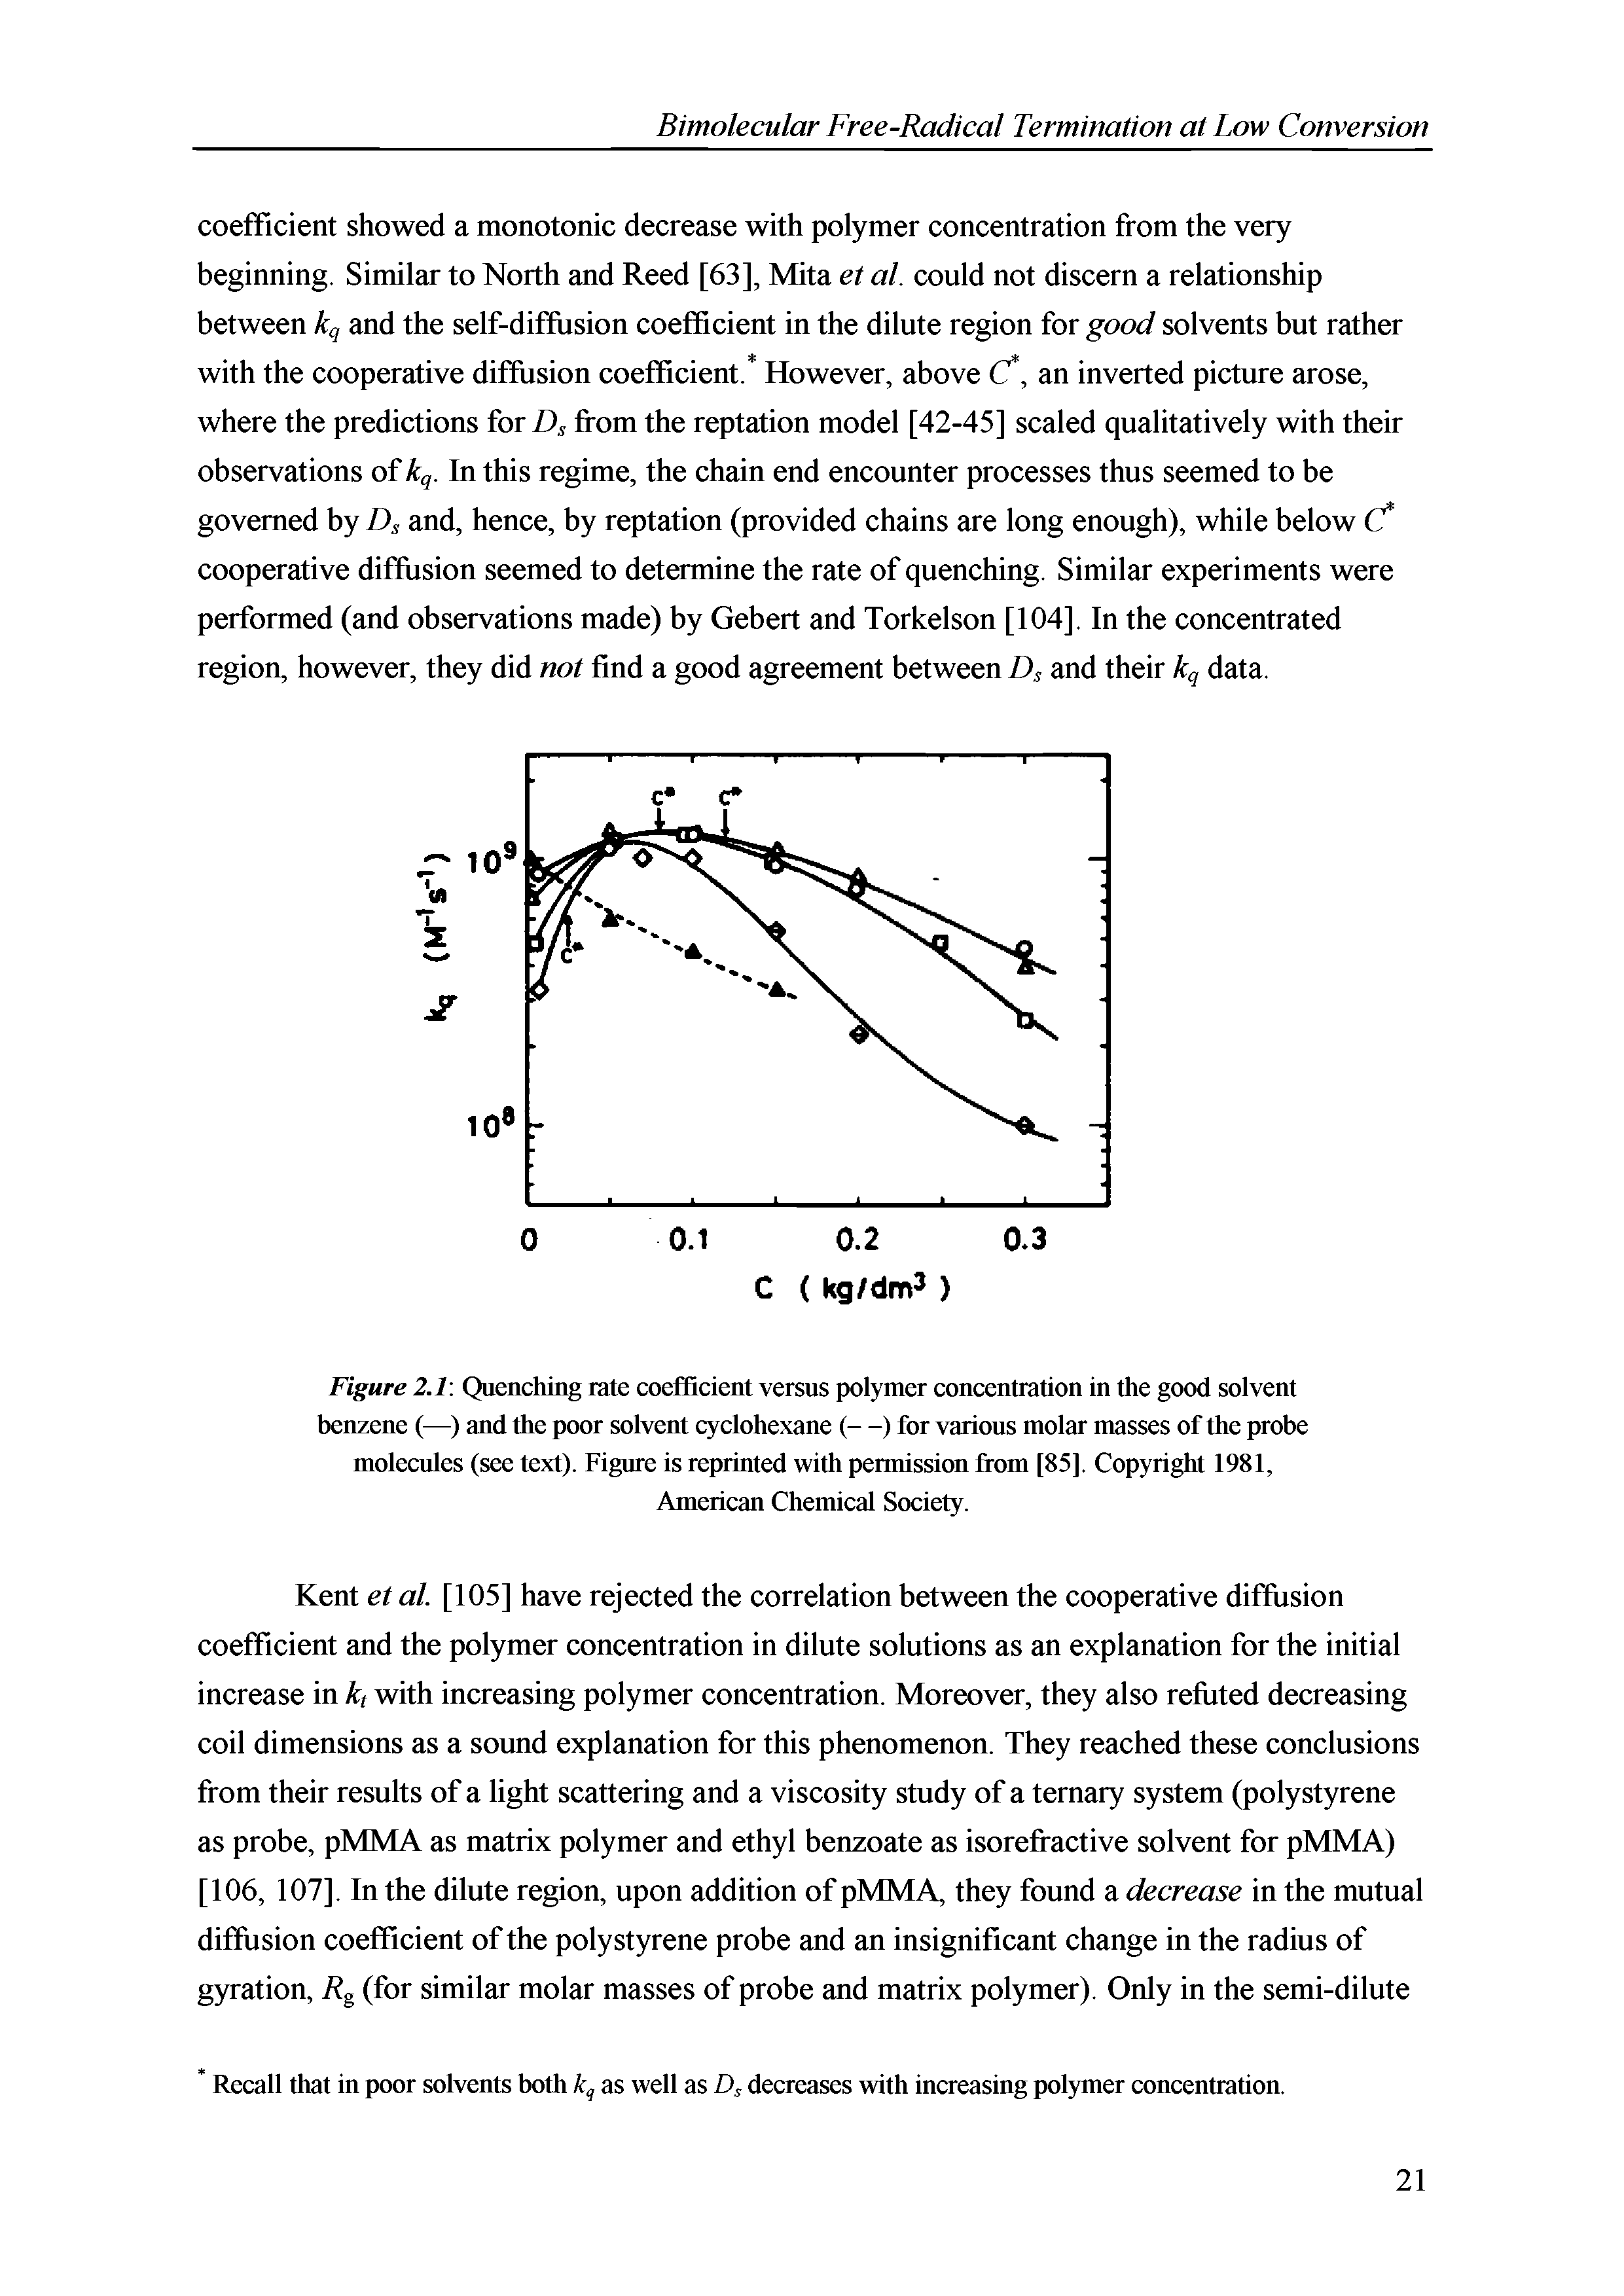 Figure 2.1 Quenching rate coefficient versus polymer concentration in the good solvent benzene (—) and the poor solvent cyclohexane (- -) for various molar masses of the probe molecules (see text). Figure is reprinted with permission from [85]. Copyright 1981,...